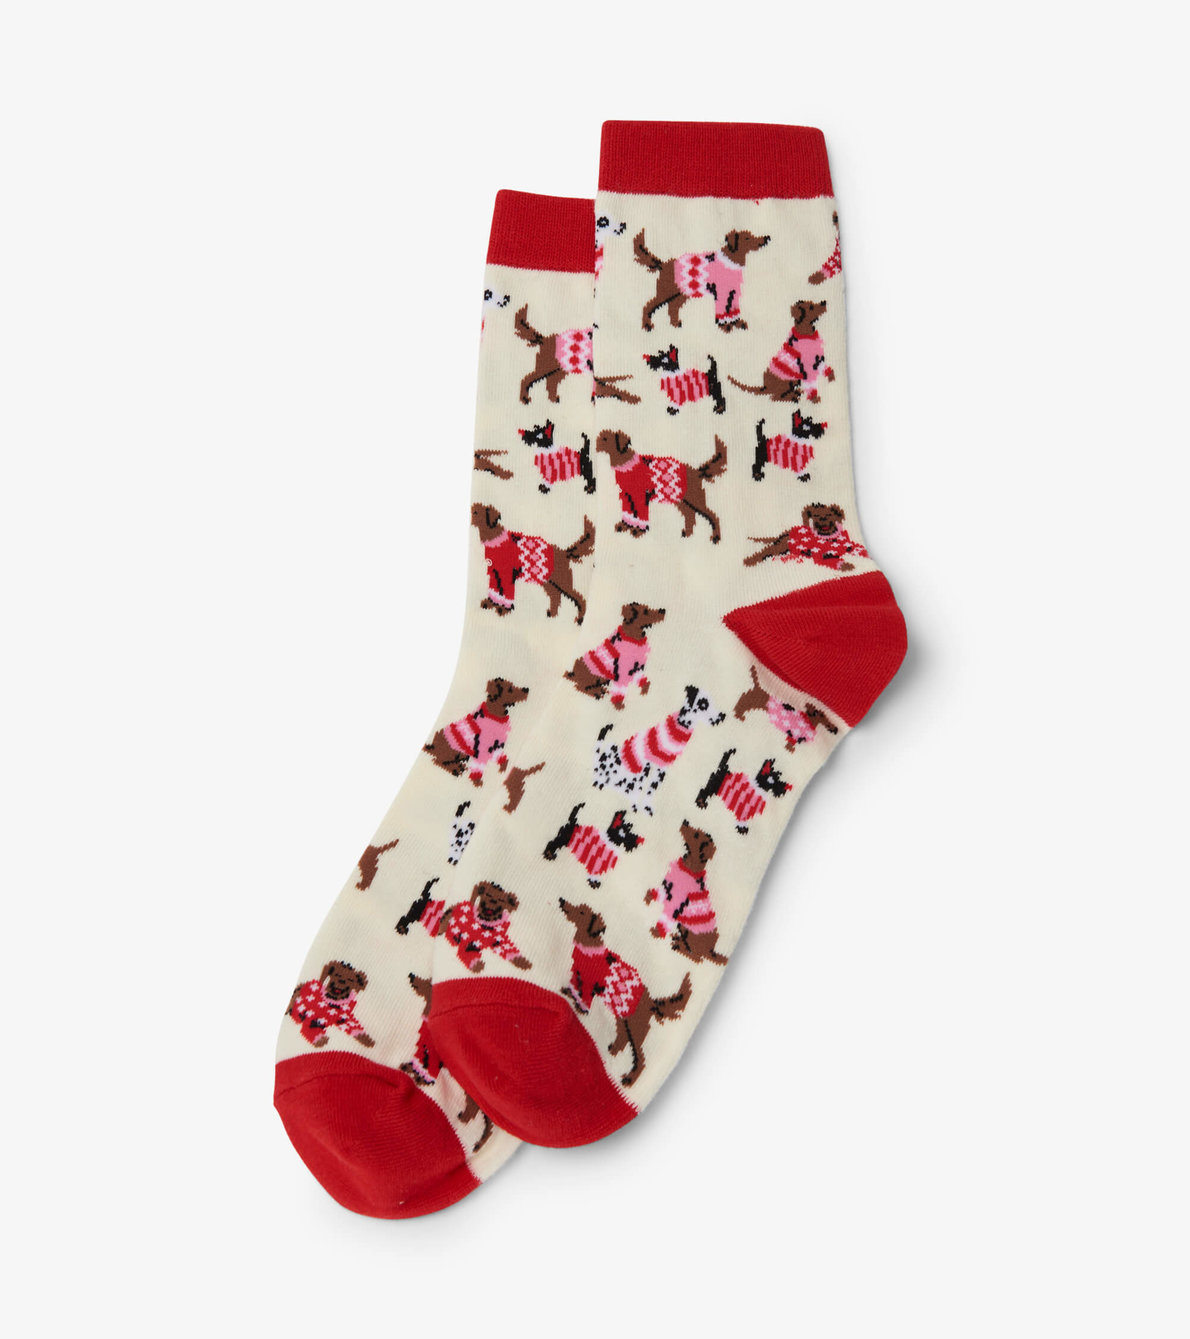 View larger image of Women's Woofing Christmas Crew Socks